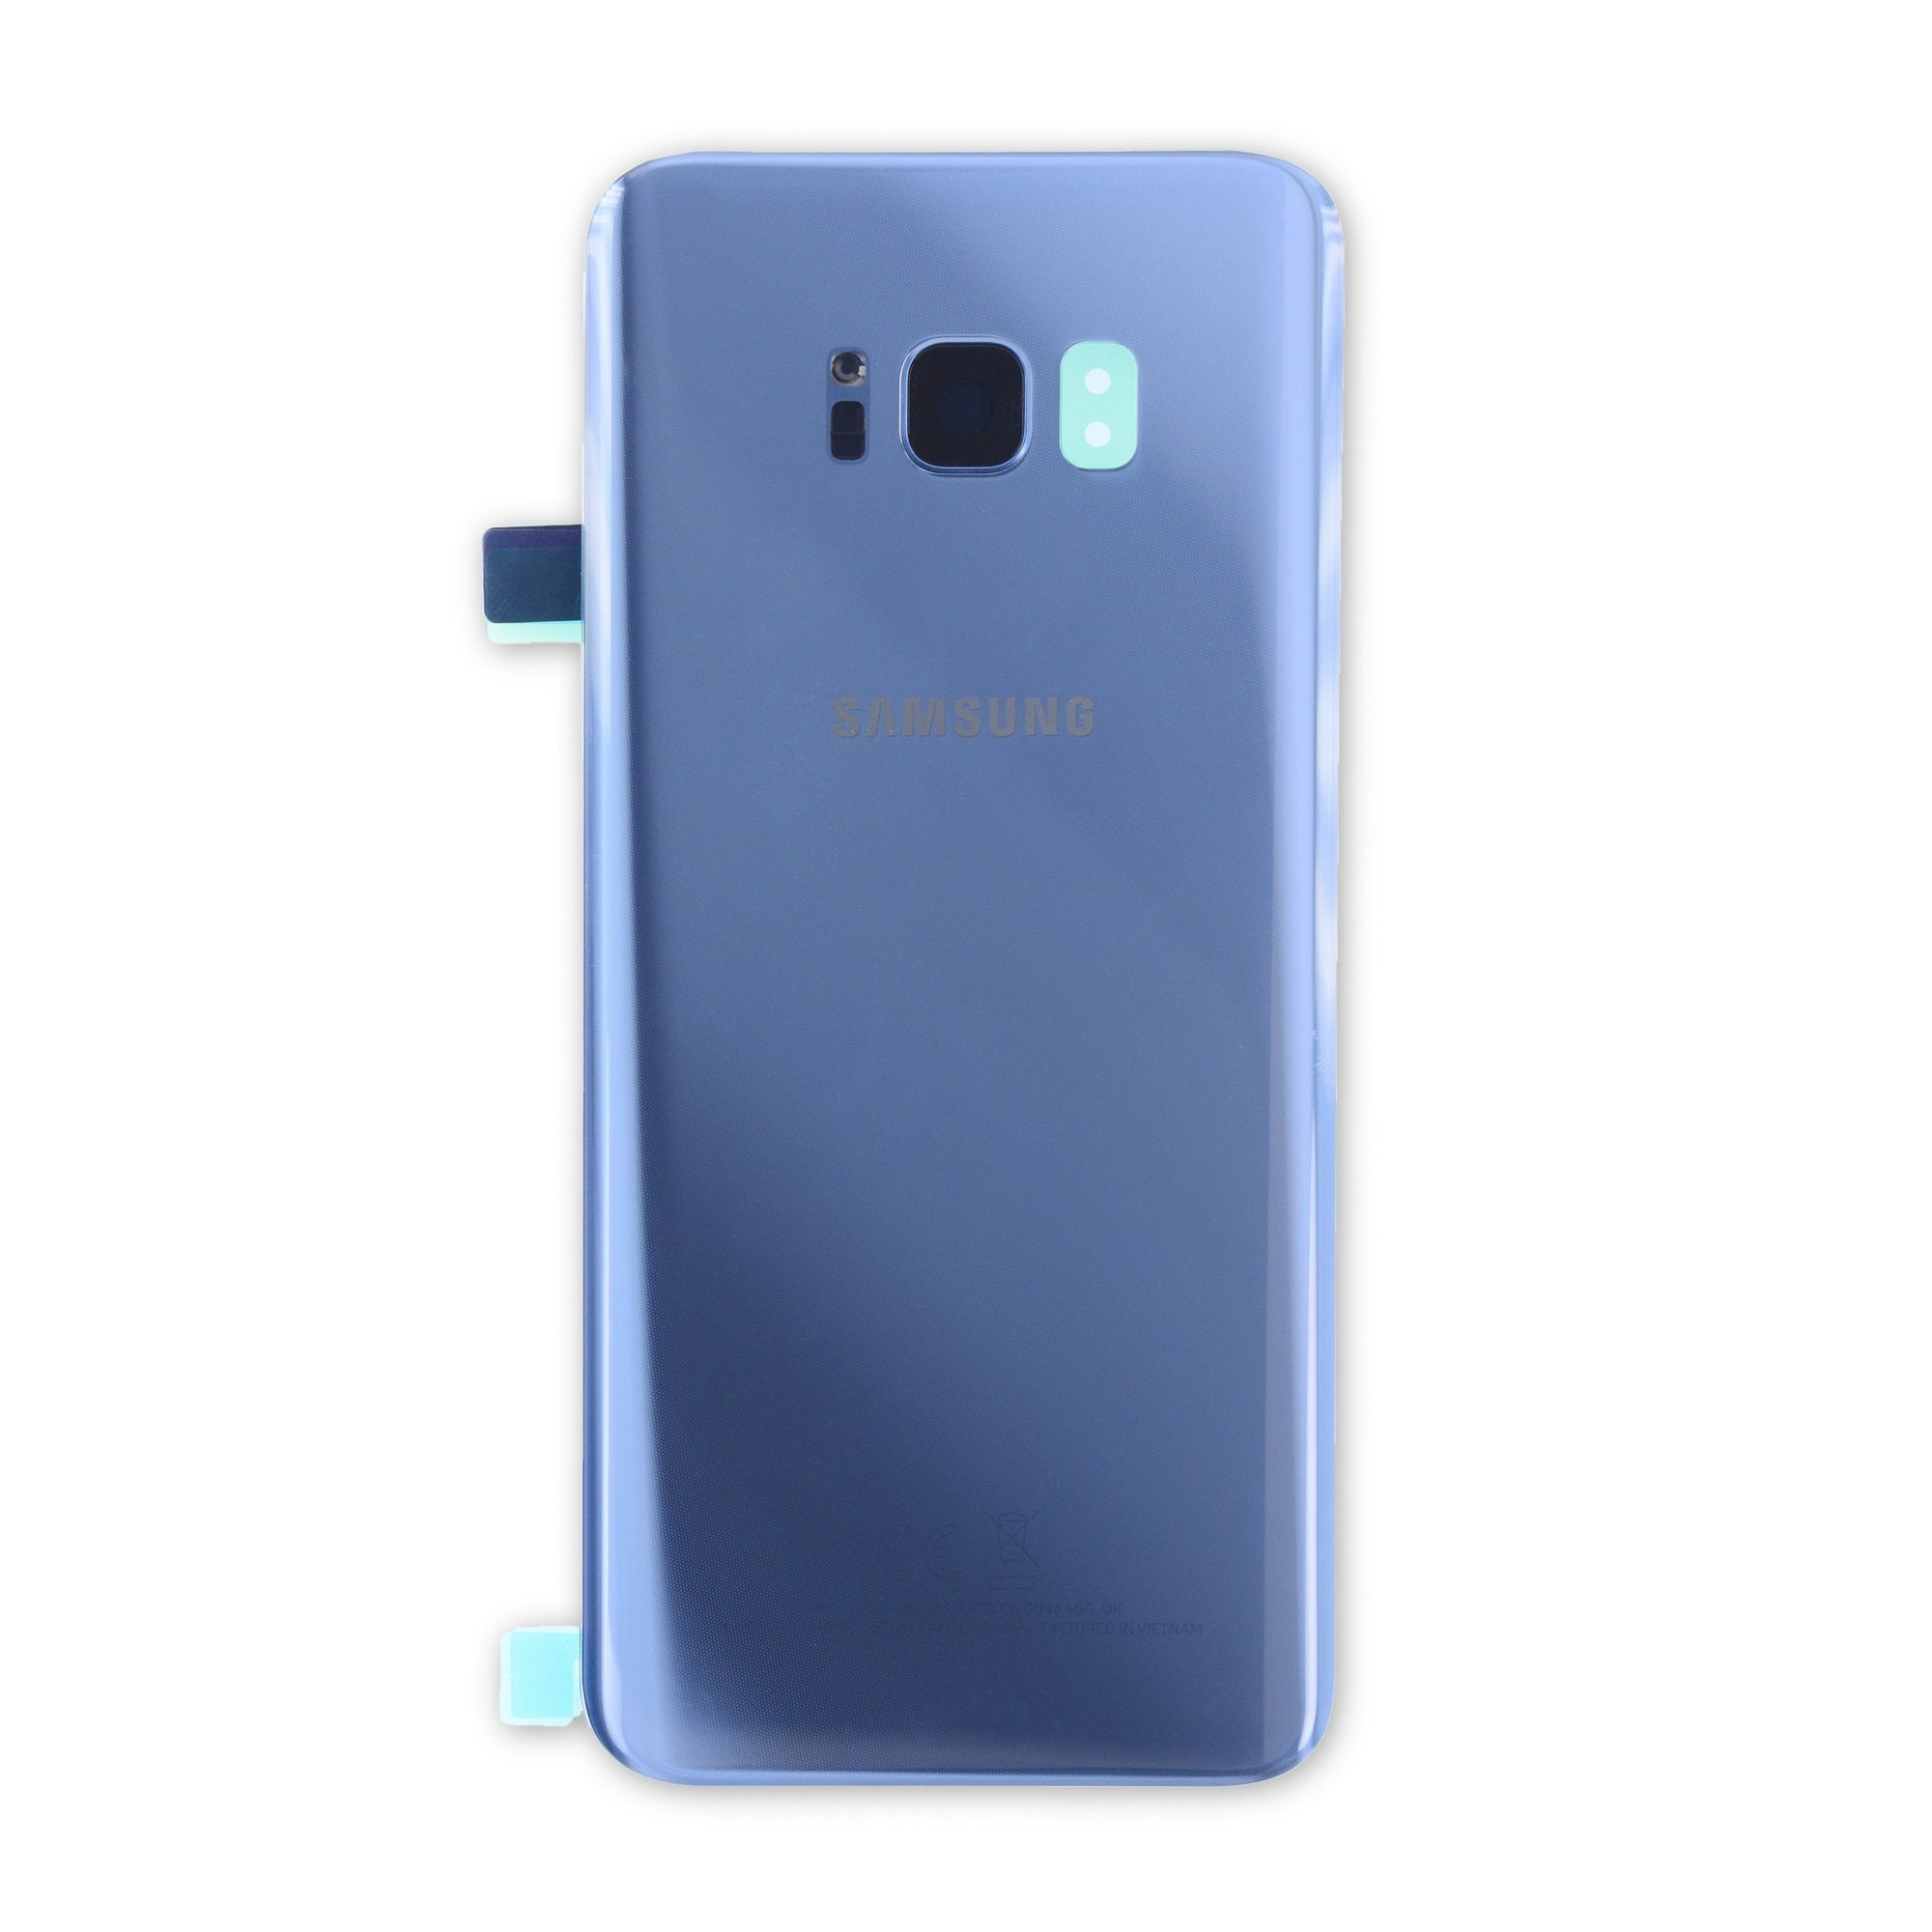 Galaxy S8+ Rear Glass Panel/Cover - Original Blue New Part Only